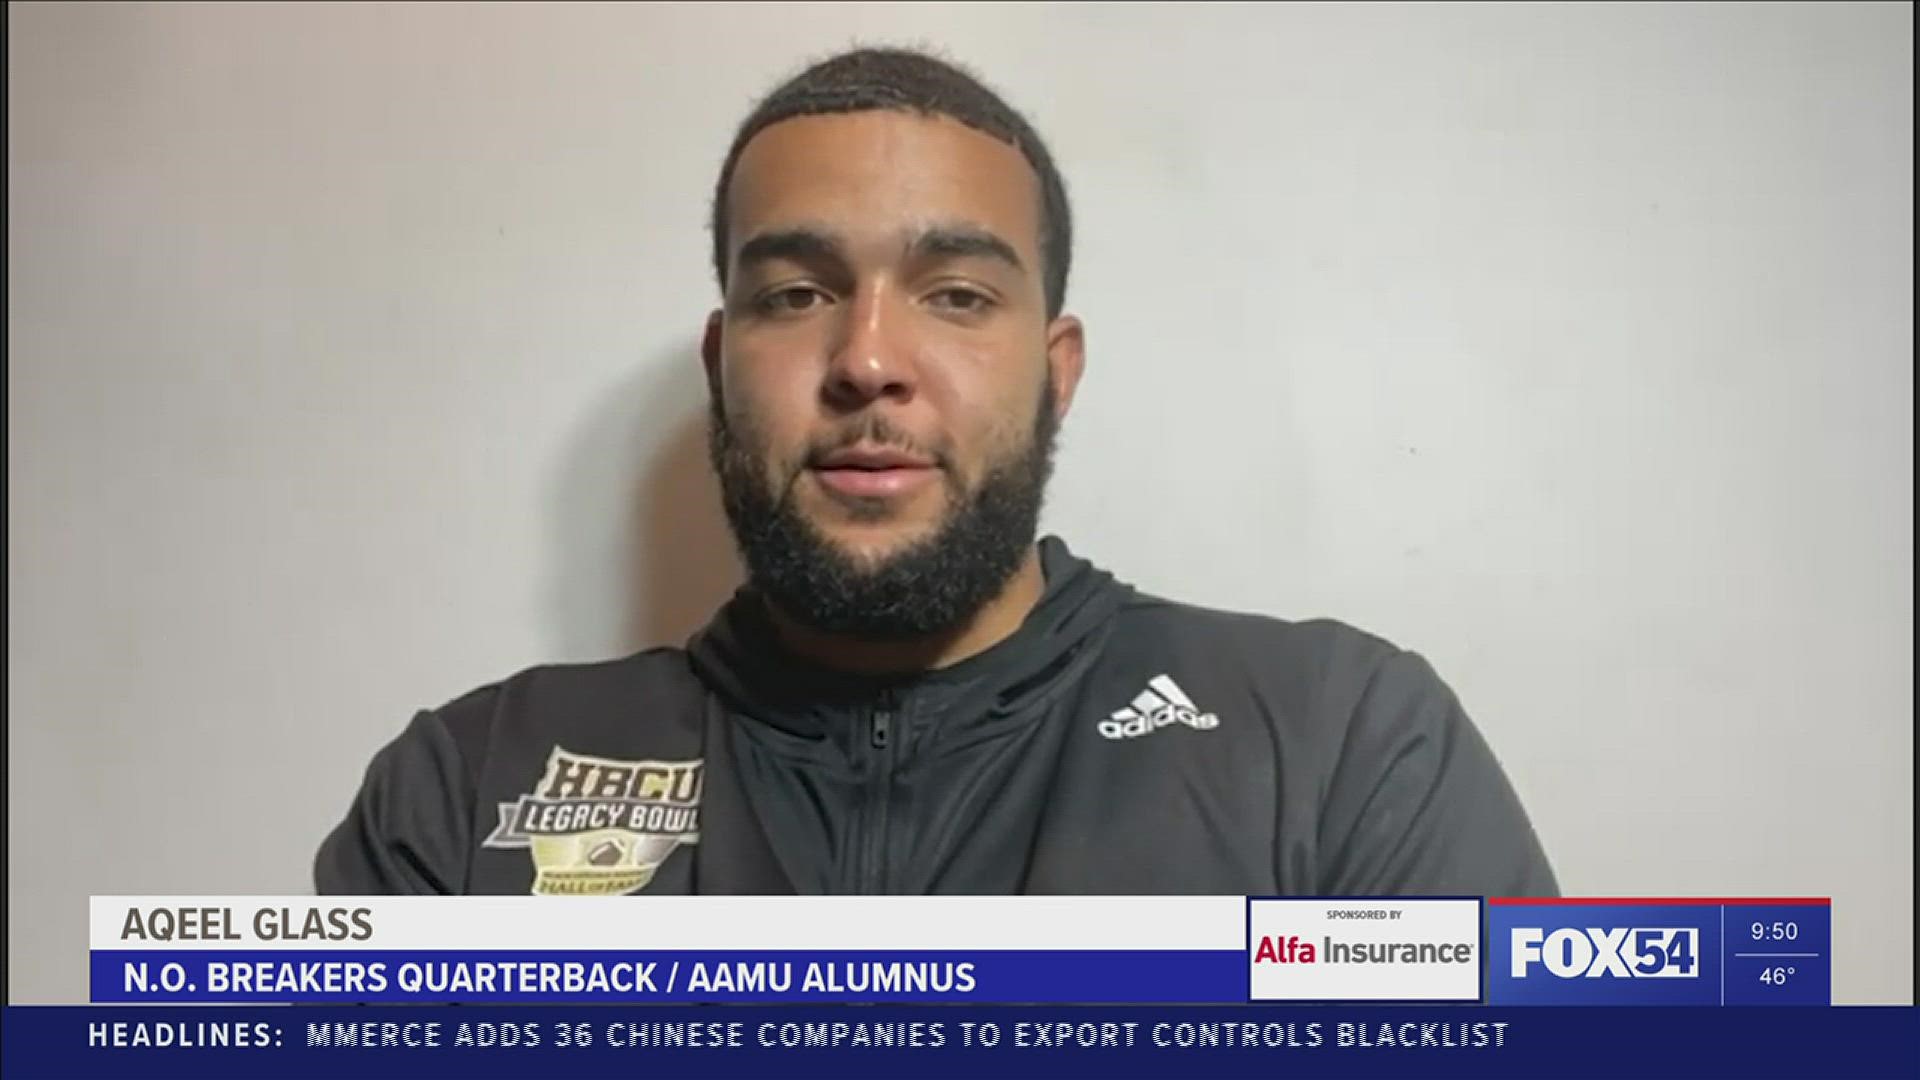 Former Alabama A&M University QB Aqeel Glass is getting another shot at playing professional football as he signed with the New Orleans Breakers of the USFL